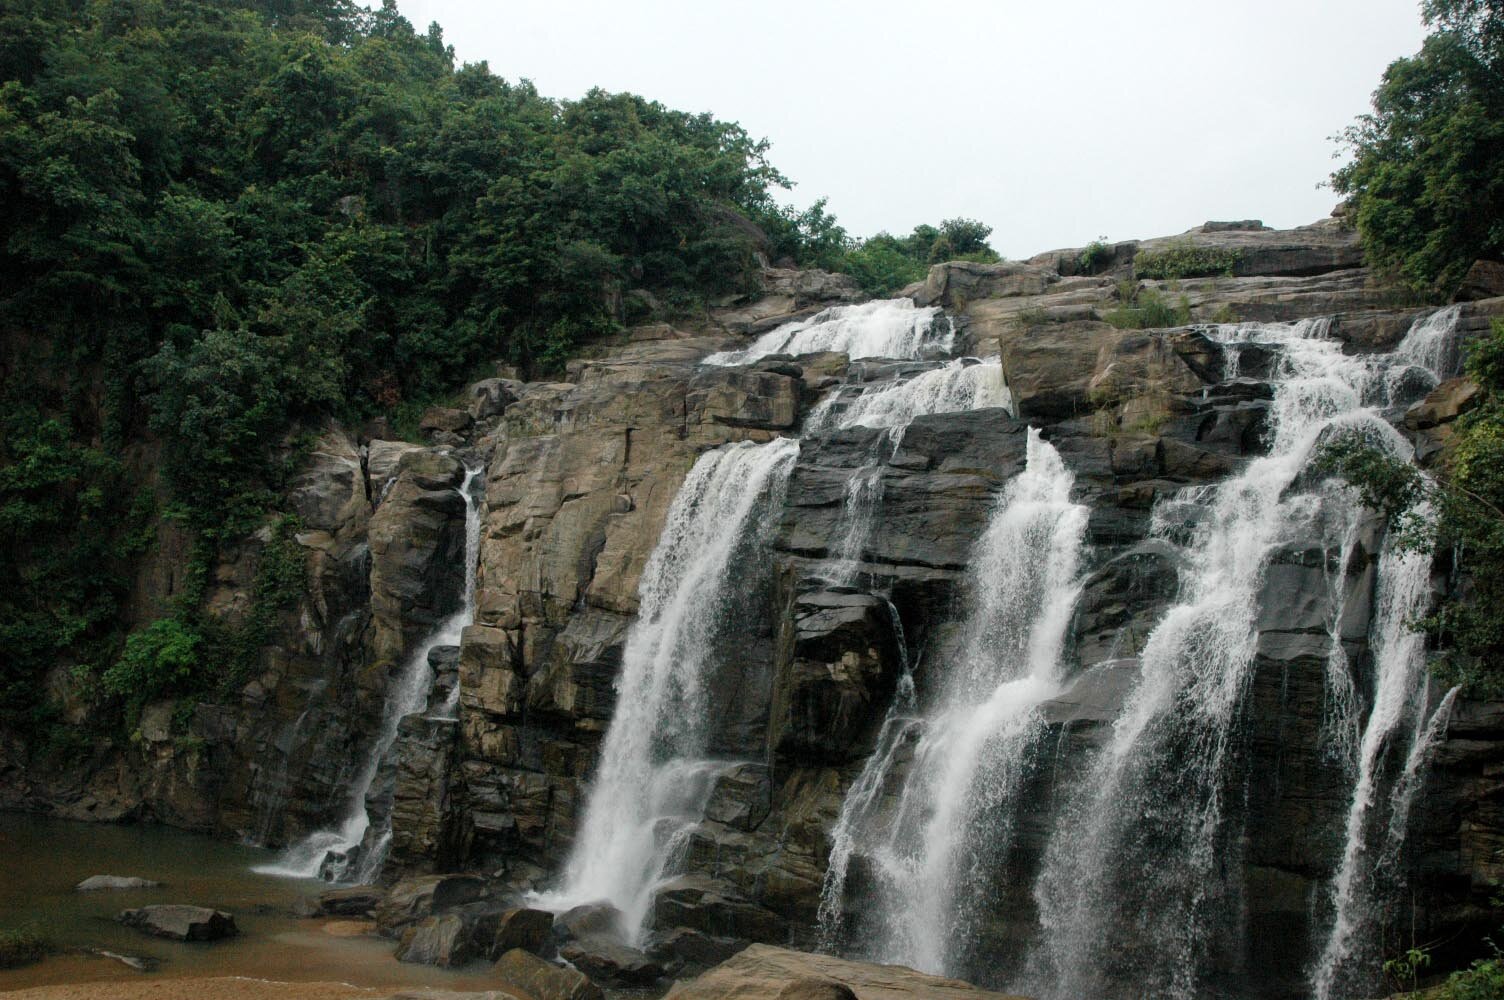 Ranchi, Capital of Jharkhand, also known as city of Waterfalls & lakes. The name comes from archi an Oraon/Kurukh word for farmer's baton used for ploughing.